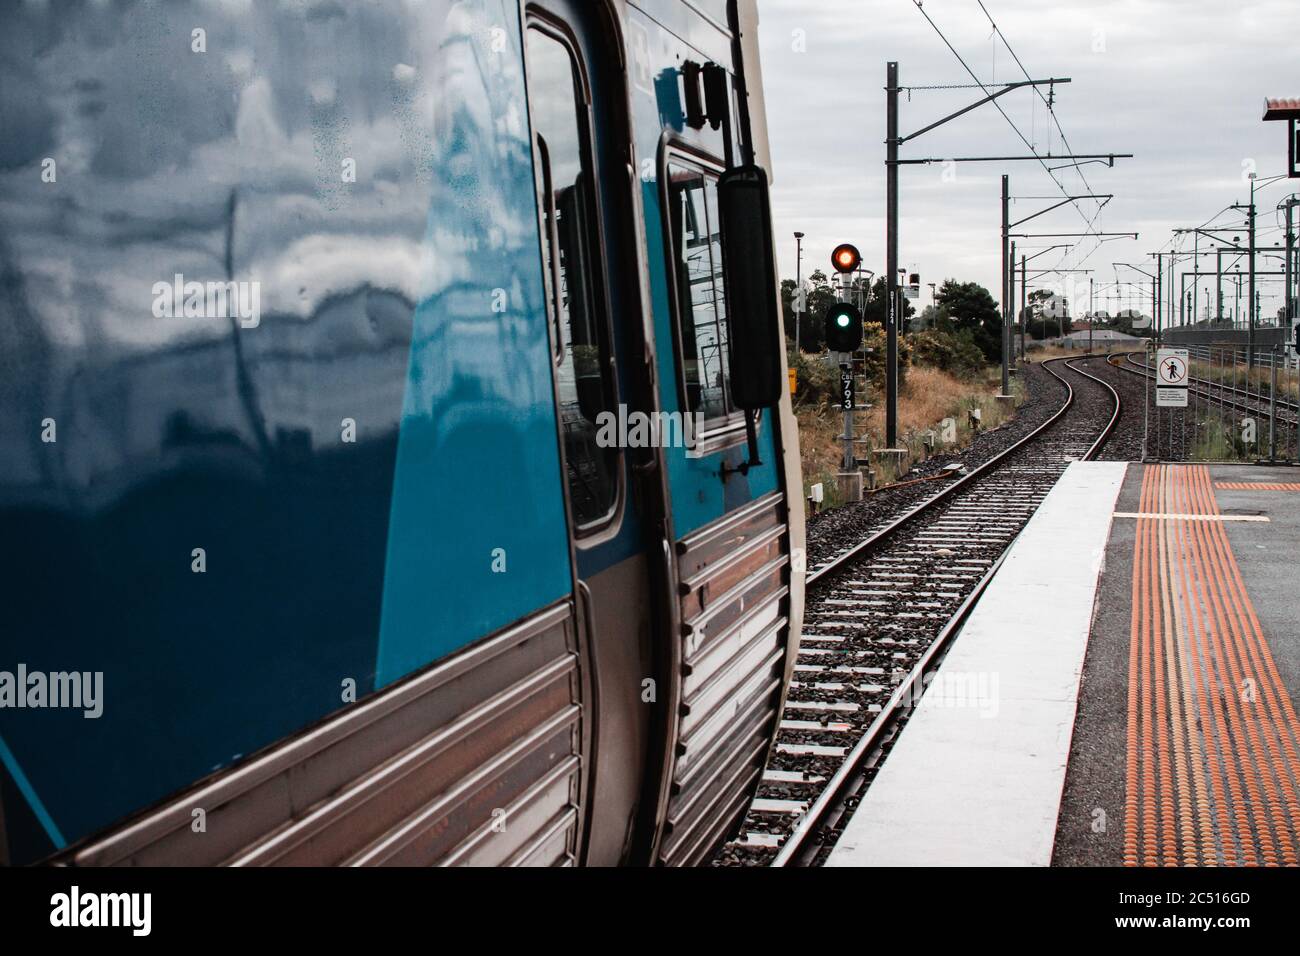 An electric comeng train in Melbourne Australia, sitting at a signal at a station platform Stock Photo